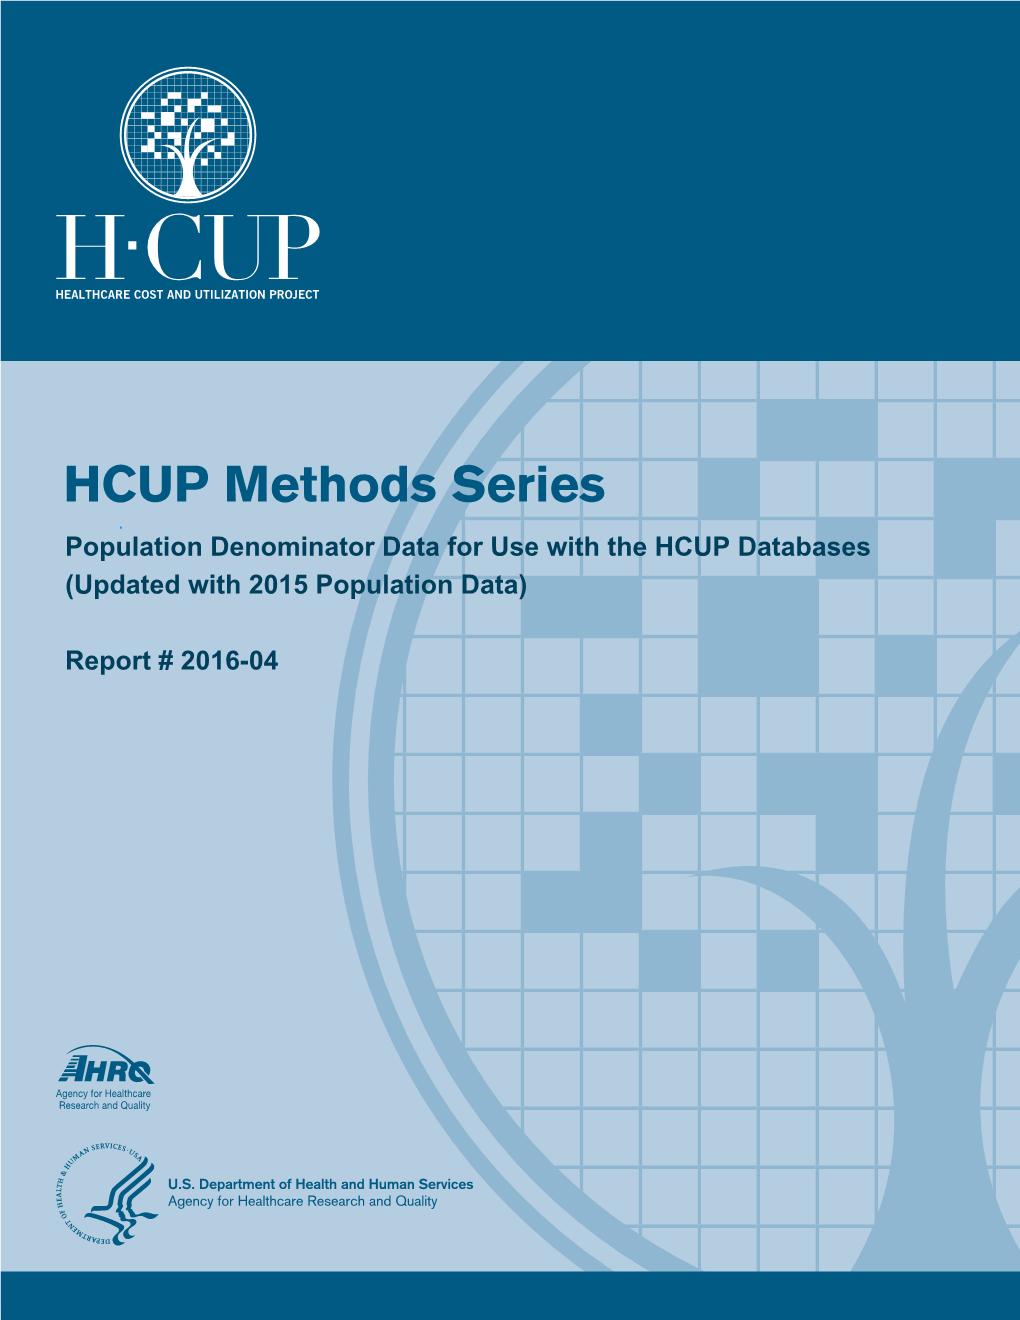 Population Denominator Data for Use with the HCUP Databases (Updated with 2015 Population Data)